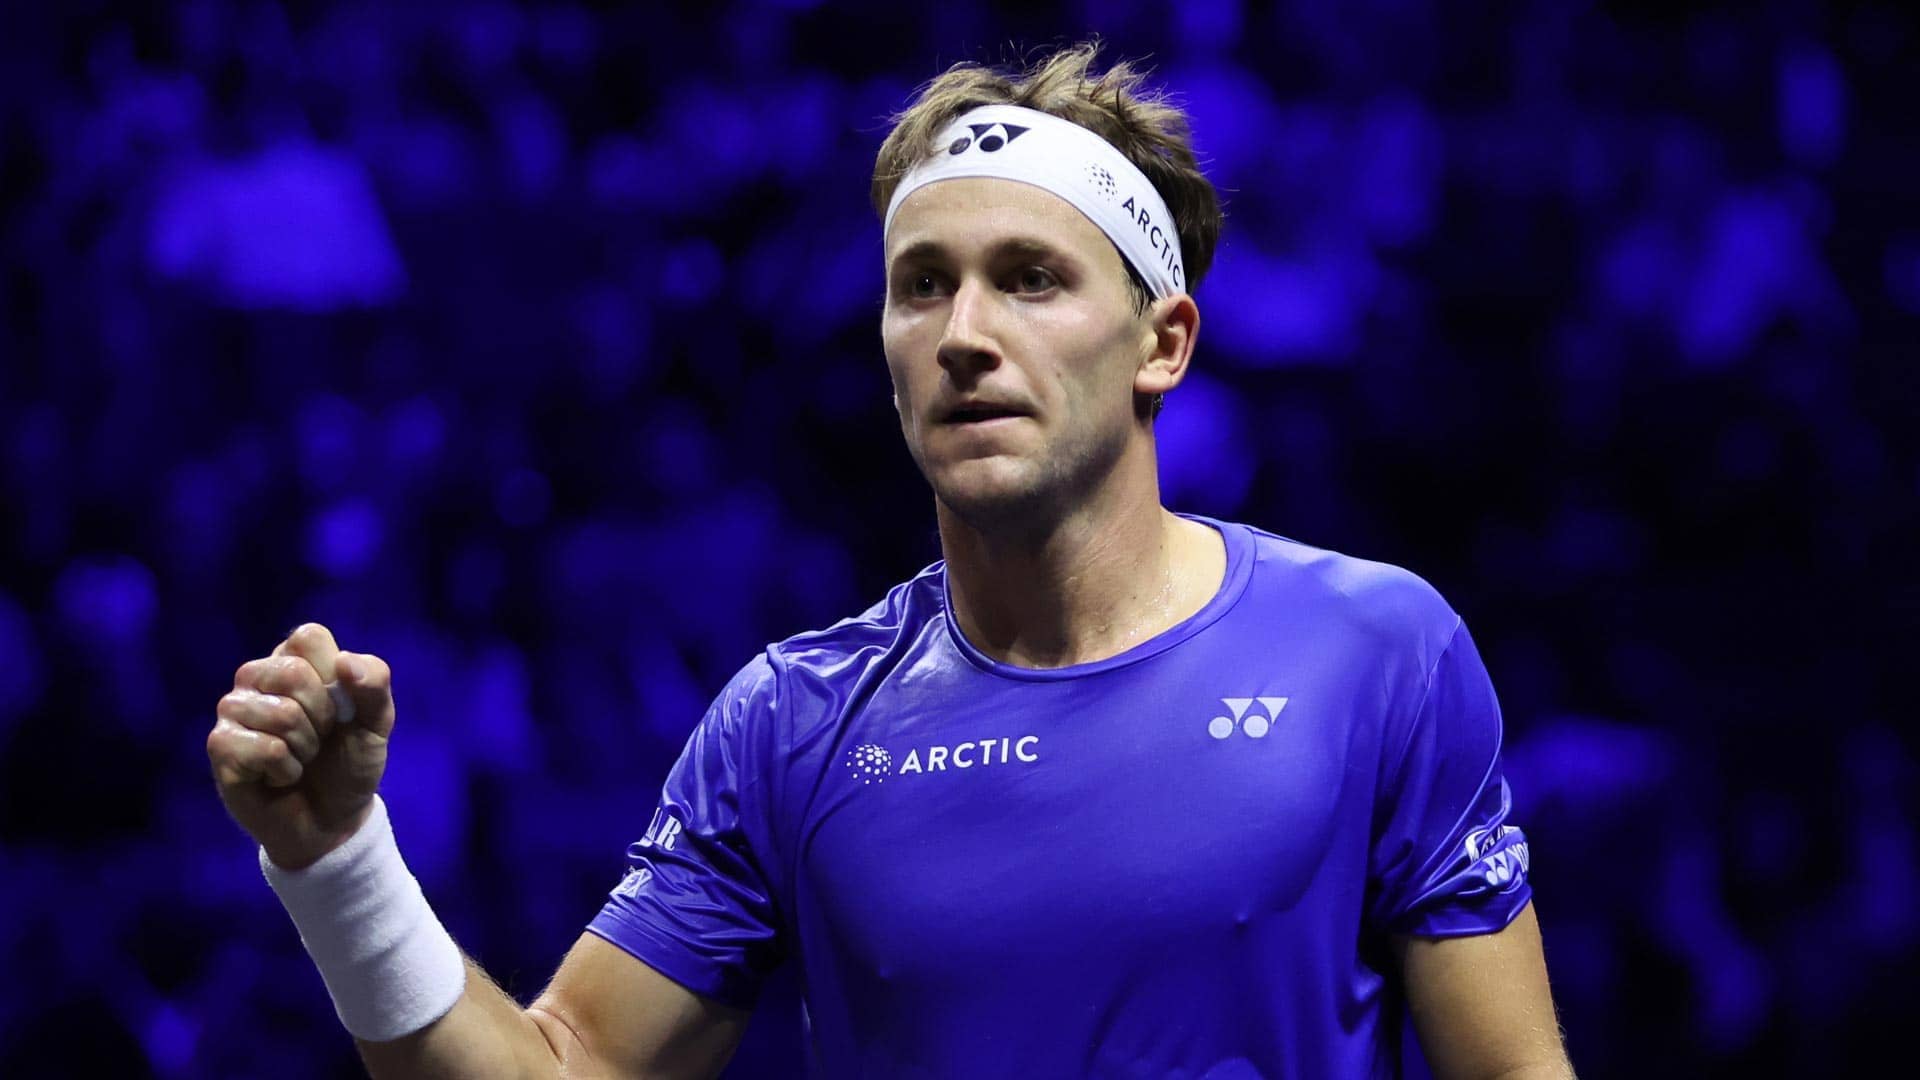 Game On, Baby! Casper Ruud Puts Team Europe On The Board At Laver Cup ATP Tour Tennis